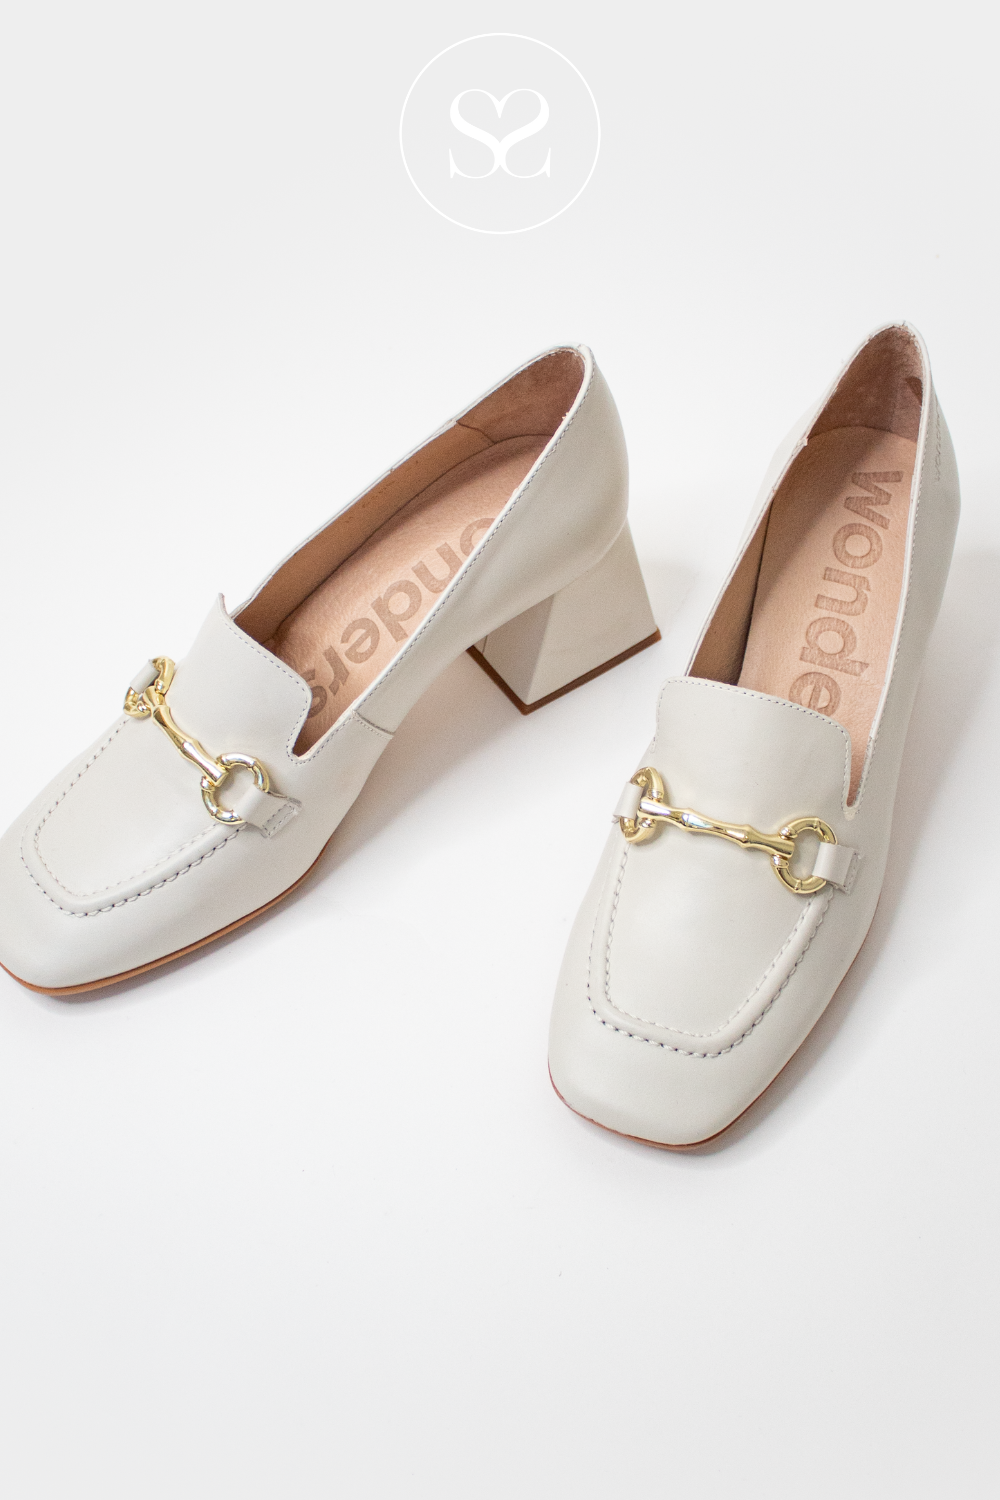 WONDERS H-6305 OFF WHITE BLOCK HEEL LOAFER WITH GOLD BUCKLE. SLIP ON STYLE